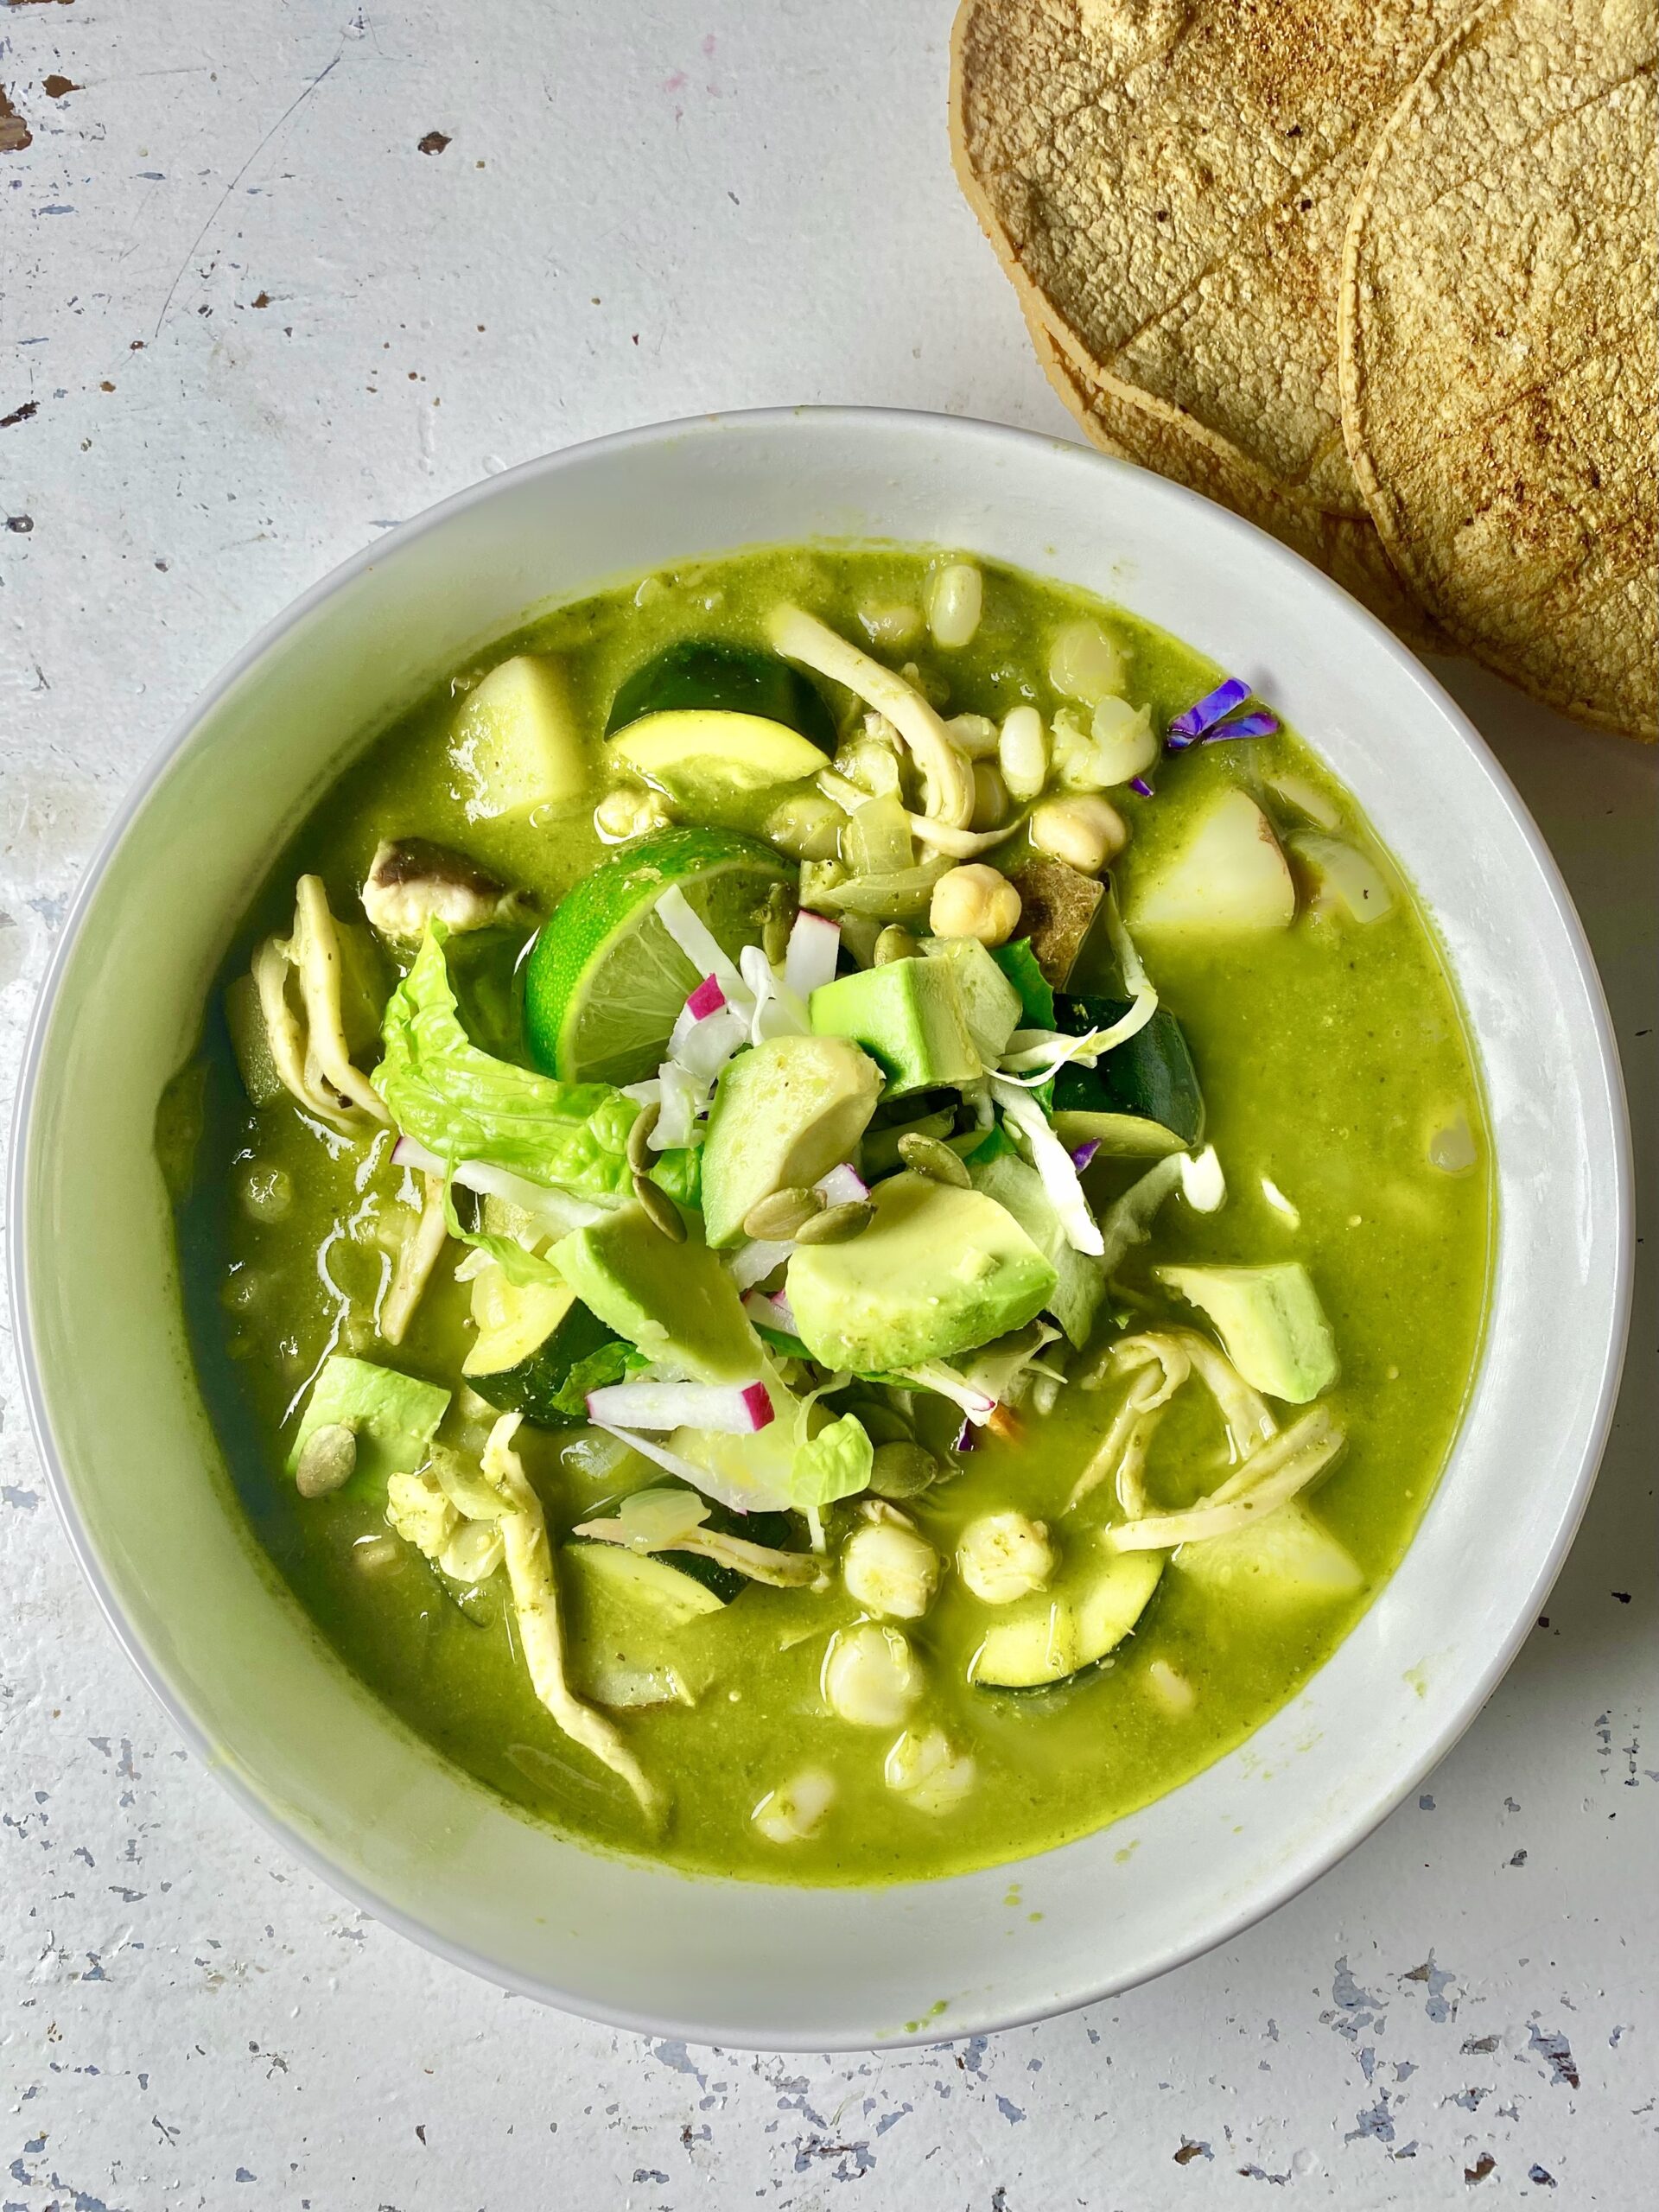 Featured image for “Posole Verde Soup”